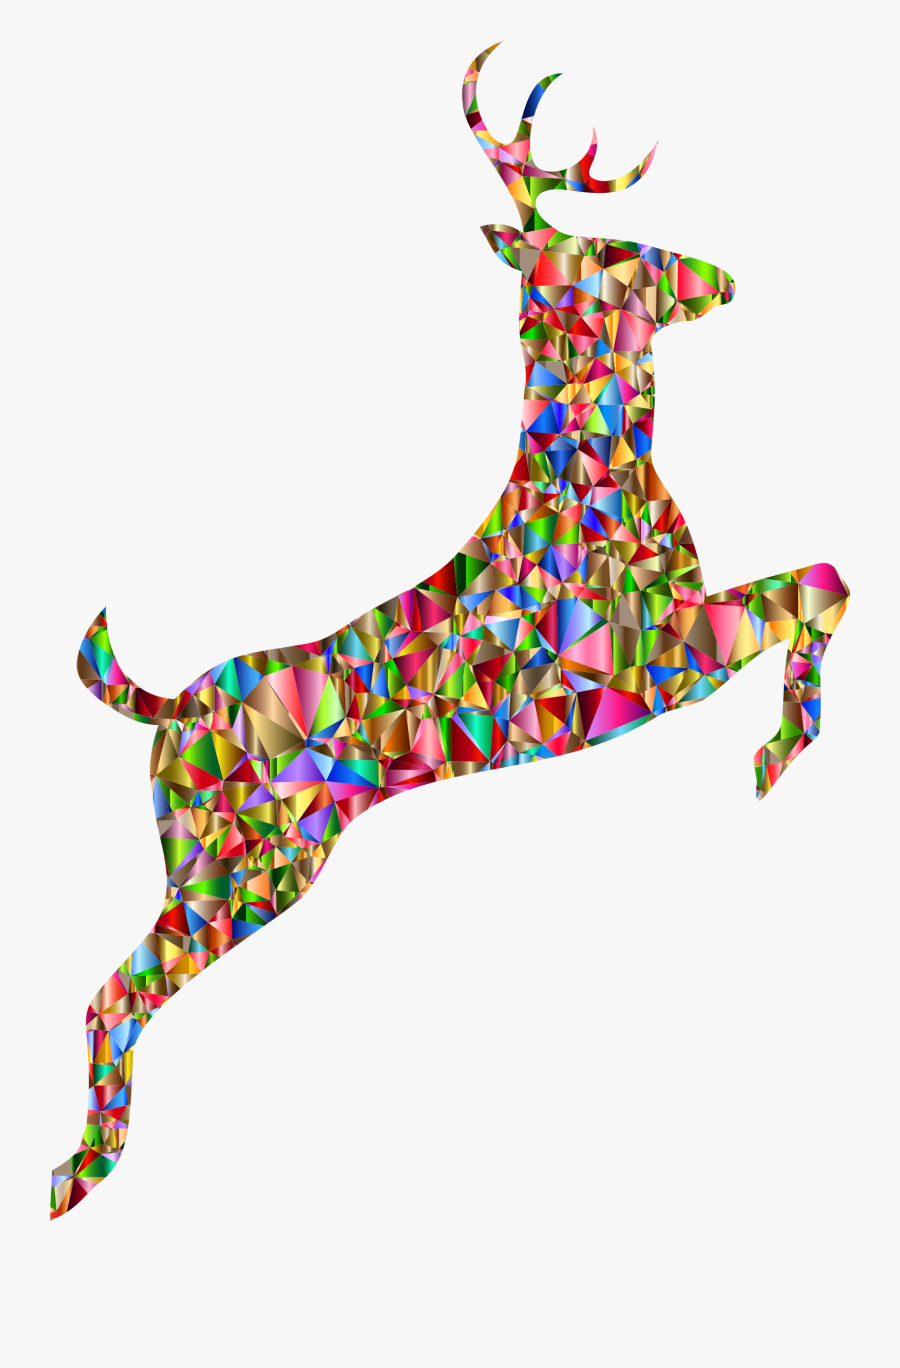 Low Poly Chromatic Leaping Deer Silhouette Clip Arts - Lowpoly Deer Transparent, Transparent Clipart